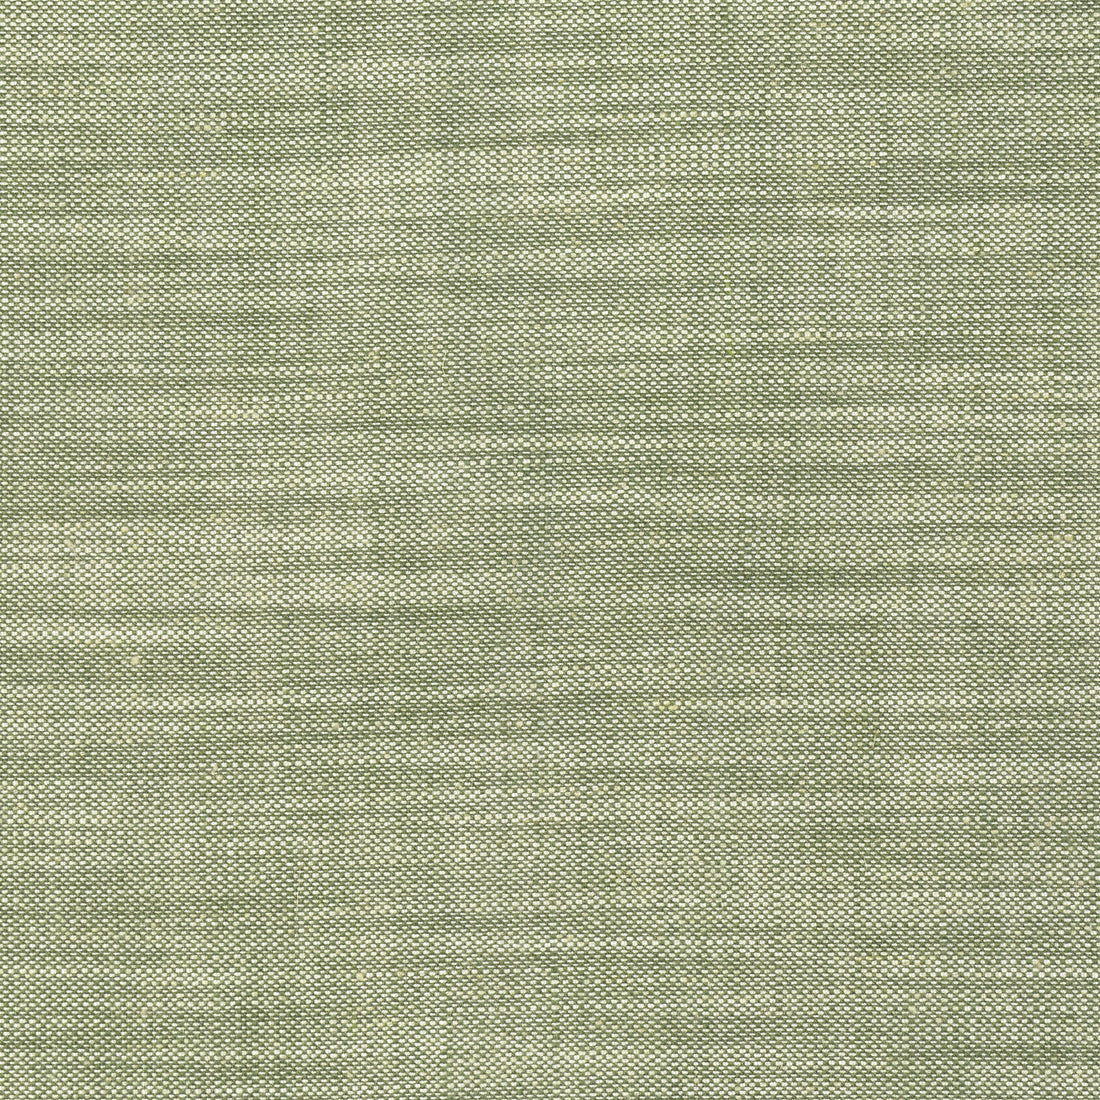 Terra Linen fabric in olive color - pattern number FWW7690 - by Thibaut in the Palisades collection